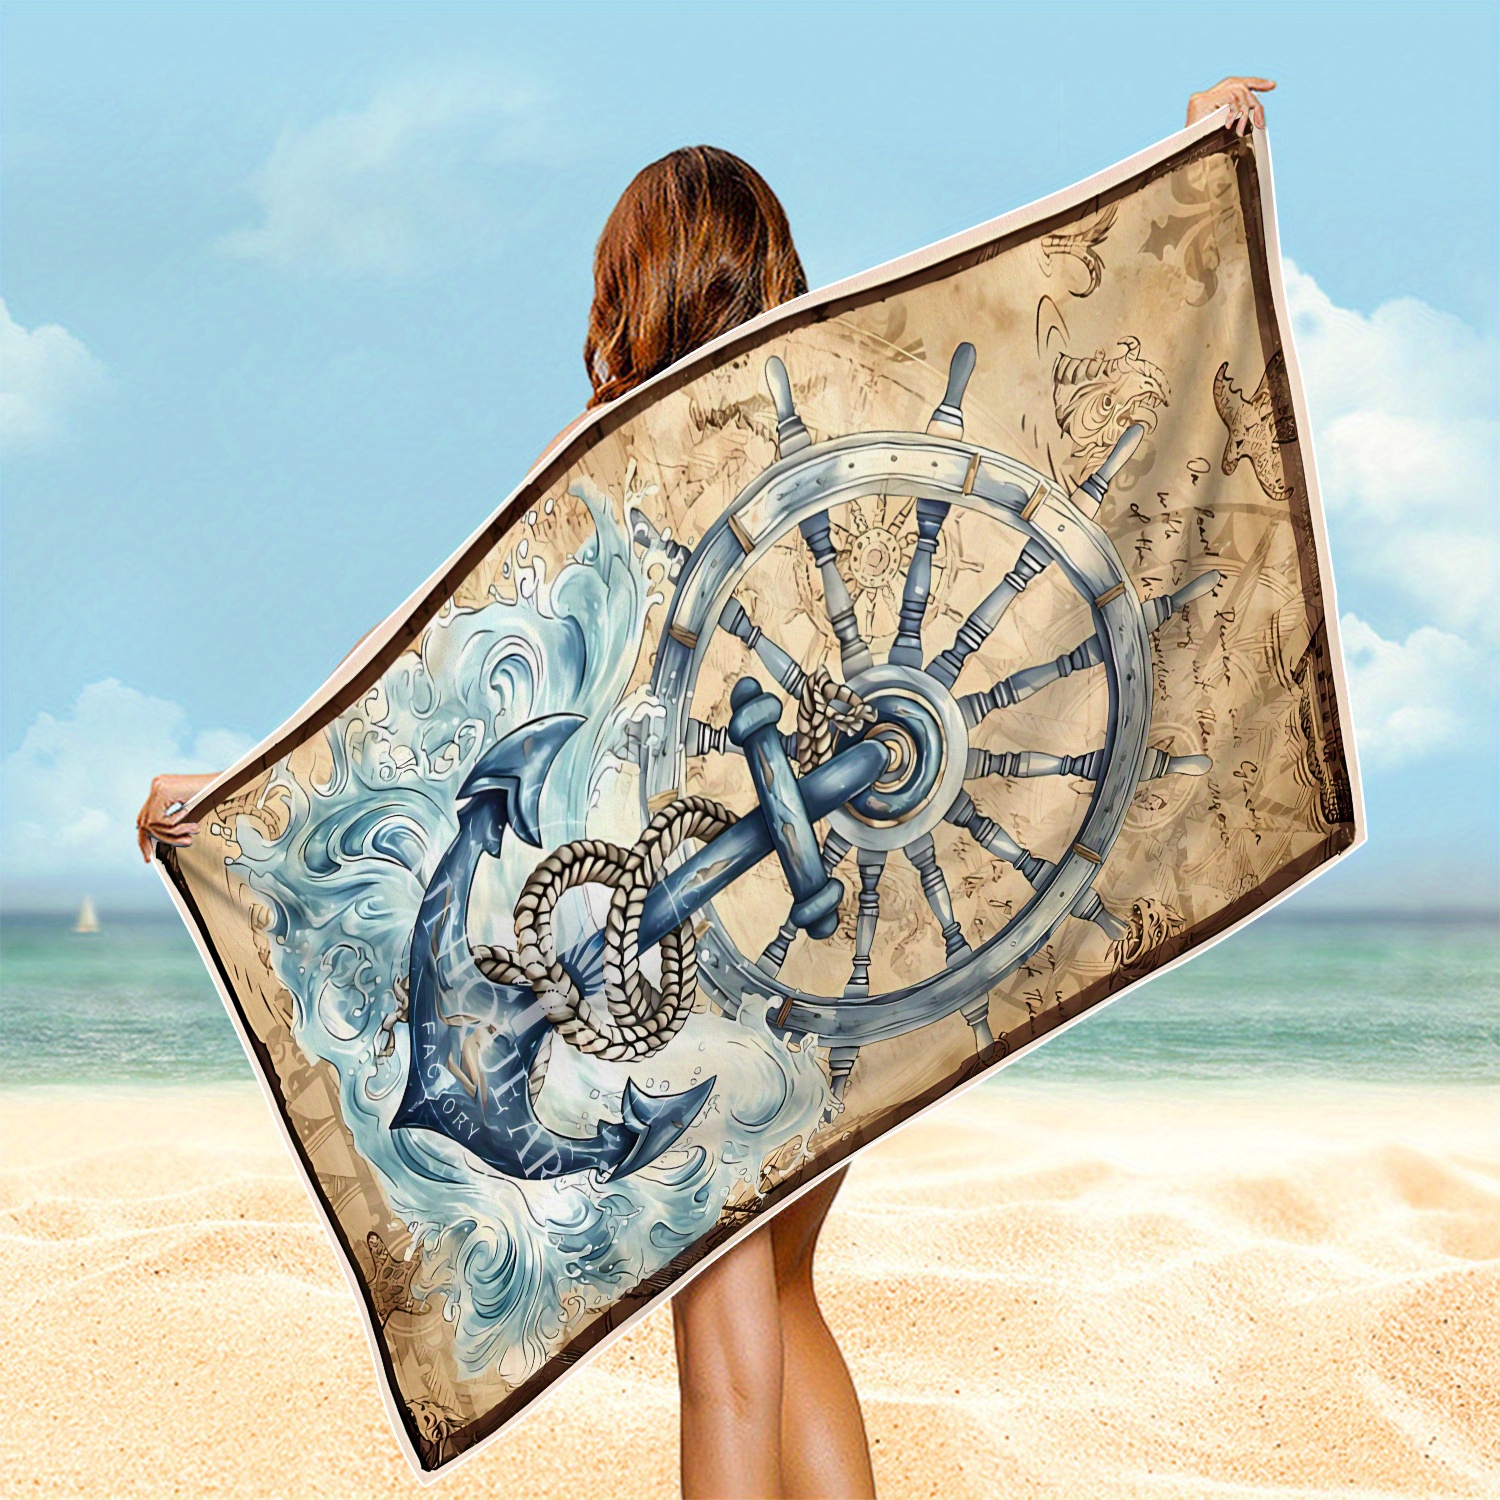 

1pc 3 Sizes Vintage Anchor Pattern Beach Towel - Large, Thick - Quick Drying & Soft & Comfortable For Sun Shawl, Yoga, Swimming, Running